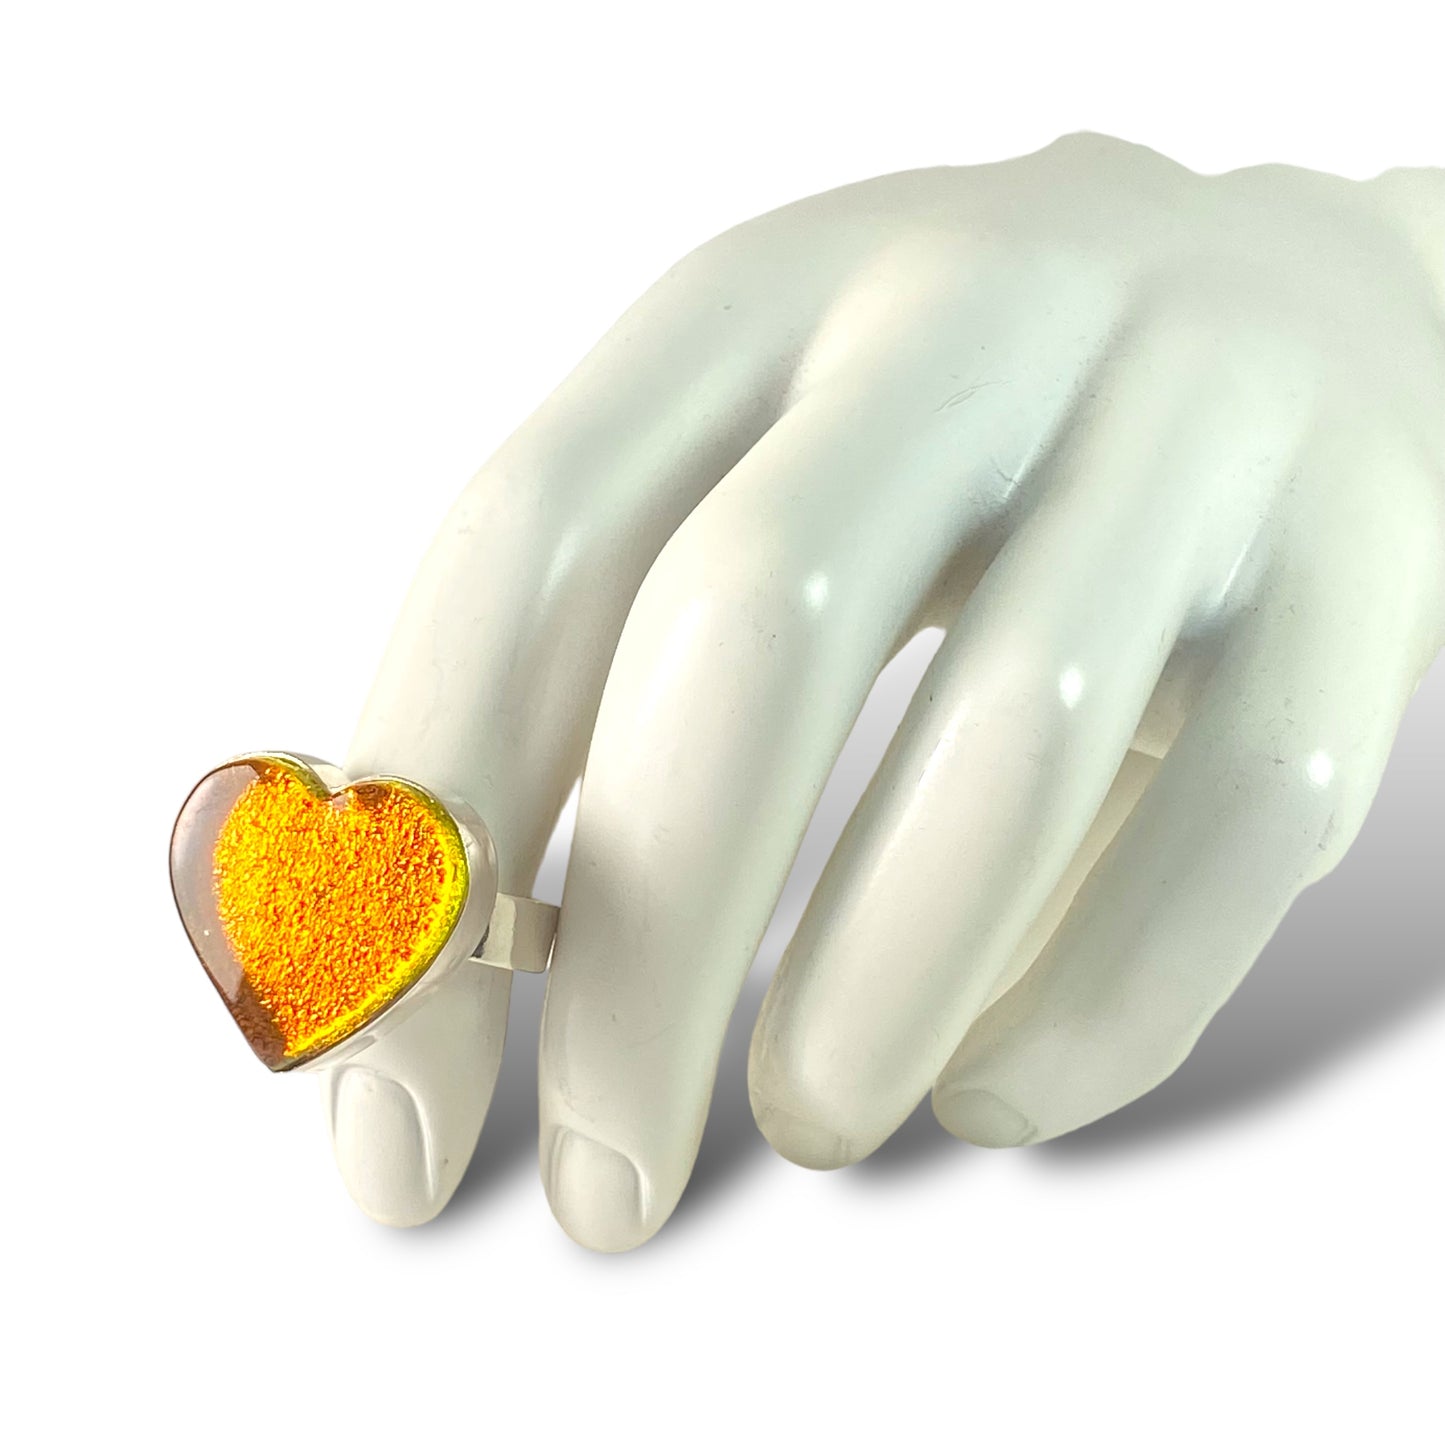 Heart Ring in Amber